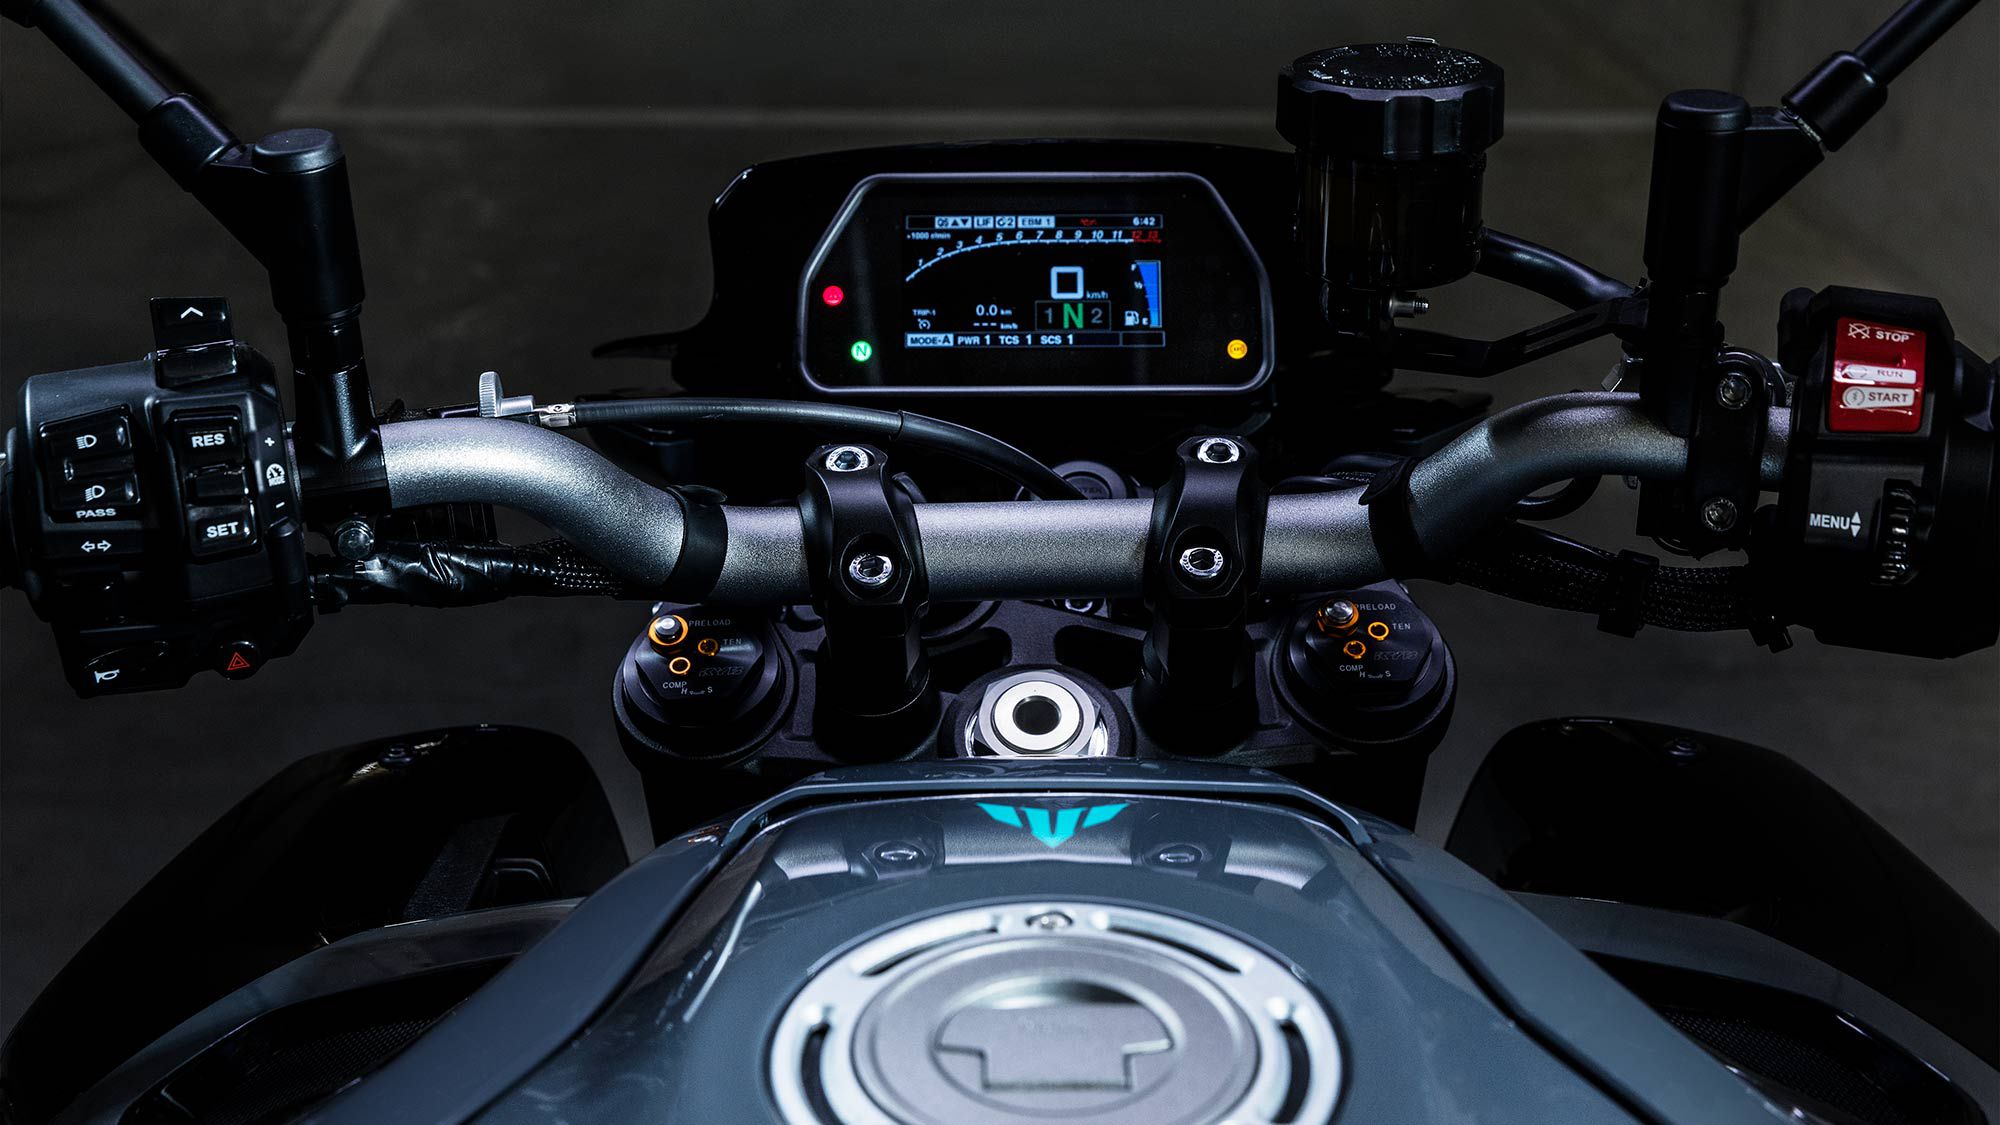 The biggest and most obvious change between the SP and the standard model tested is the second-generation Öhlins electronic suspension, now linked to the six-axis IMU. There will be three semi-active and three manual suspension modes to choose from.